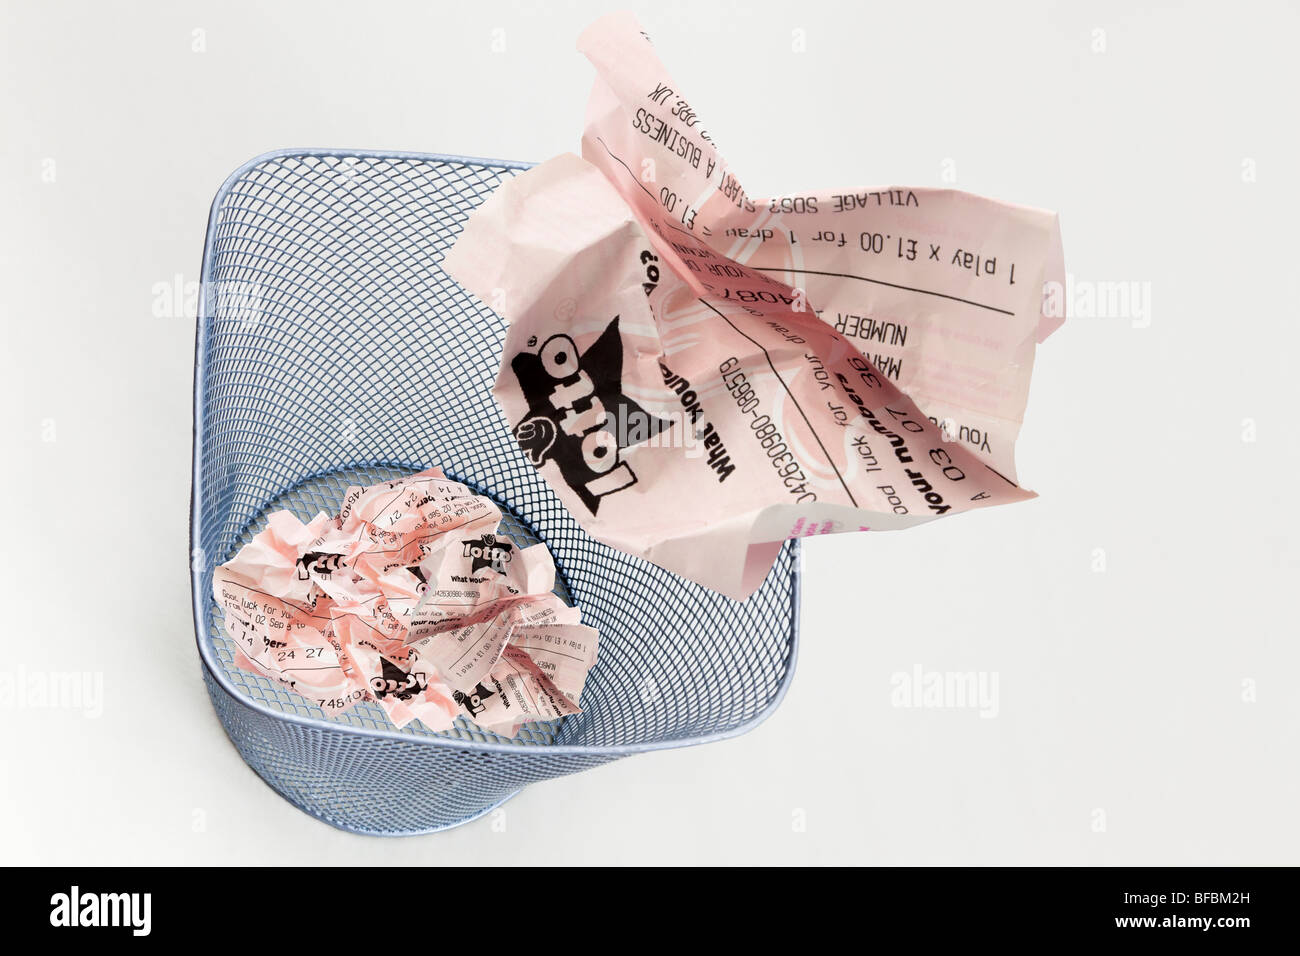 composite image of screwed up unlucky Lotto UK National lottery ticket thrown into a waste paper basket to illustrate wasting money gambling concept Stock Photo